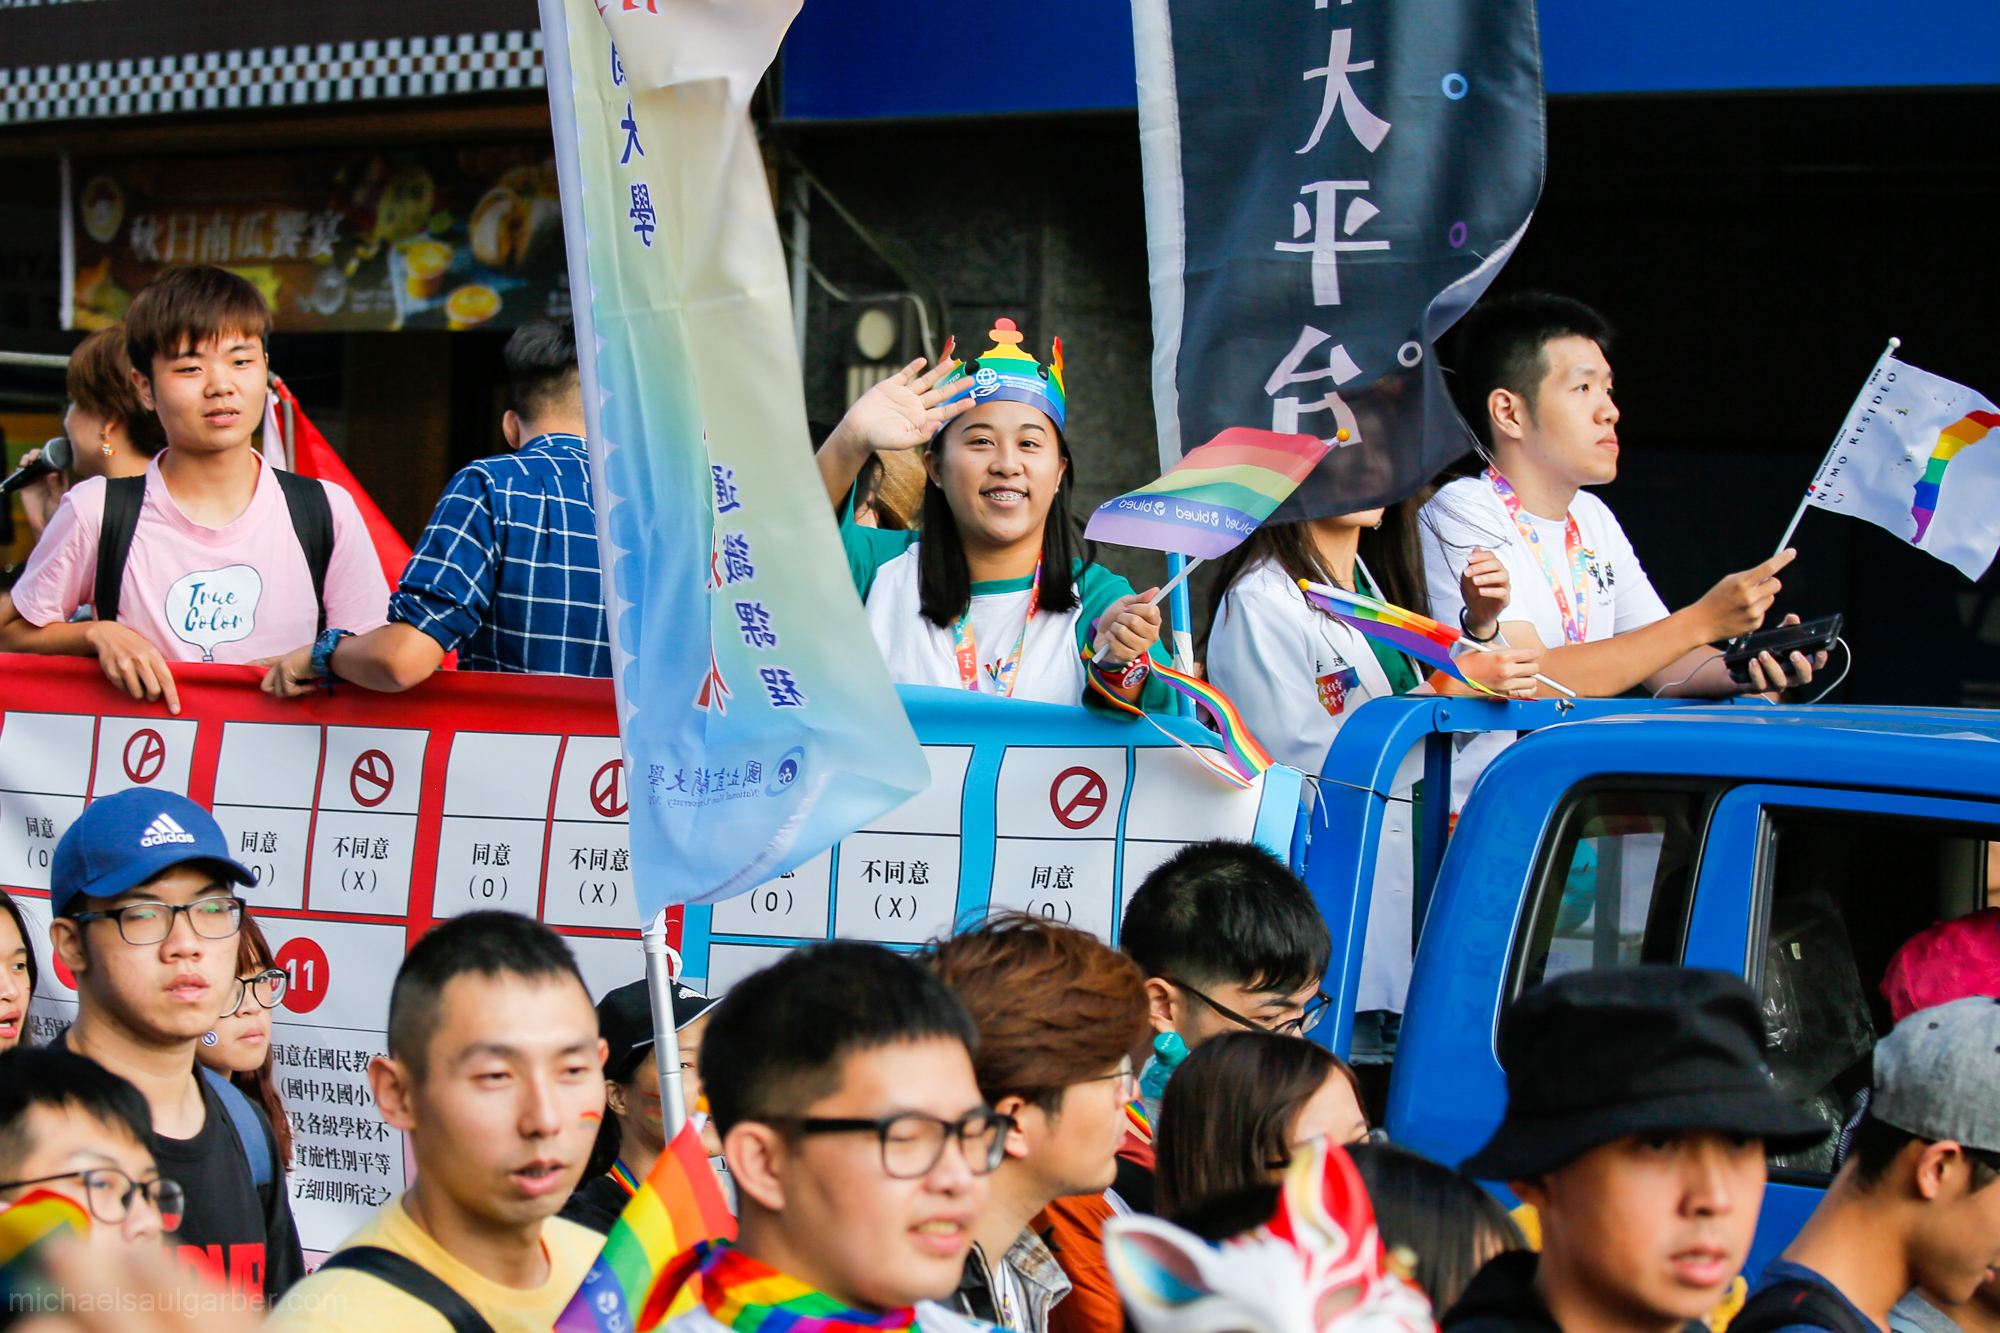 Ahead of the referendum on marriage equality, the sign on this truck reminds marchers how to vote, Taiwan Pride, 2018